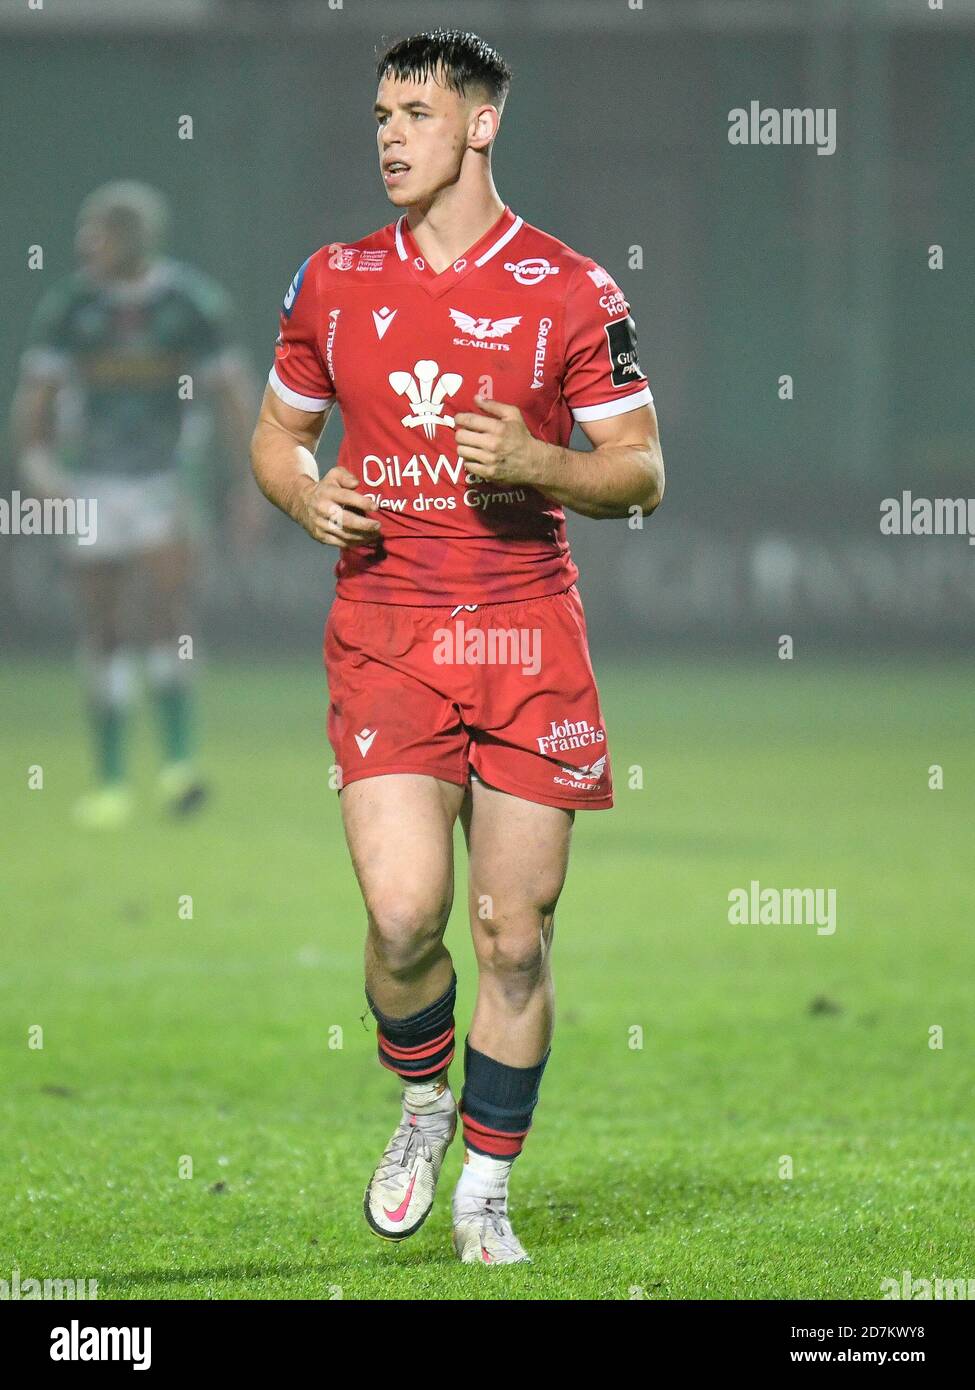 Stadio Comunale di Monigo, Treviso, Italy, 23 Oct 2020, Tom Rogers (Scarlets) during Benetton Treviso vs Scarlets Rugby, Rugby Guinness Pro 14 match - Credit: LM/Ettore Griffoni/Alamy Live News Stock Photo